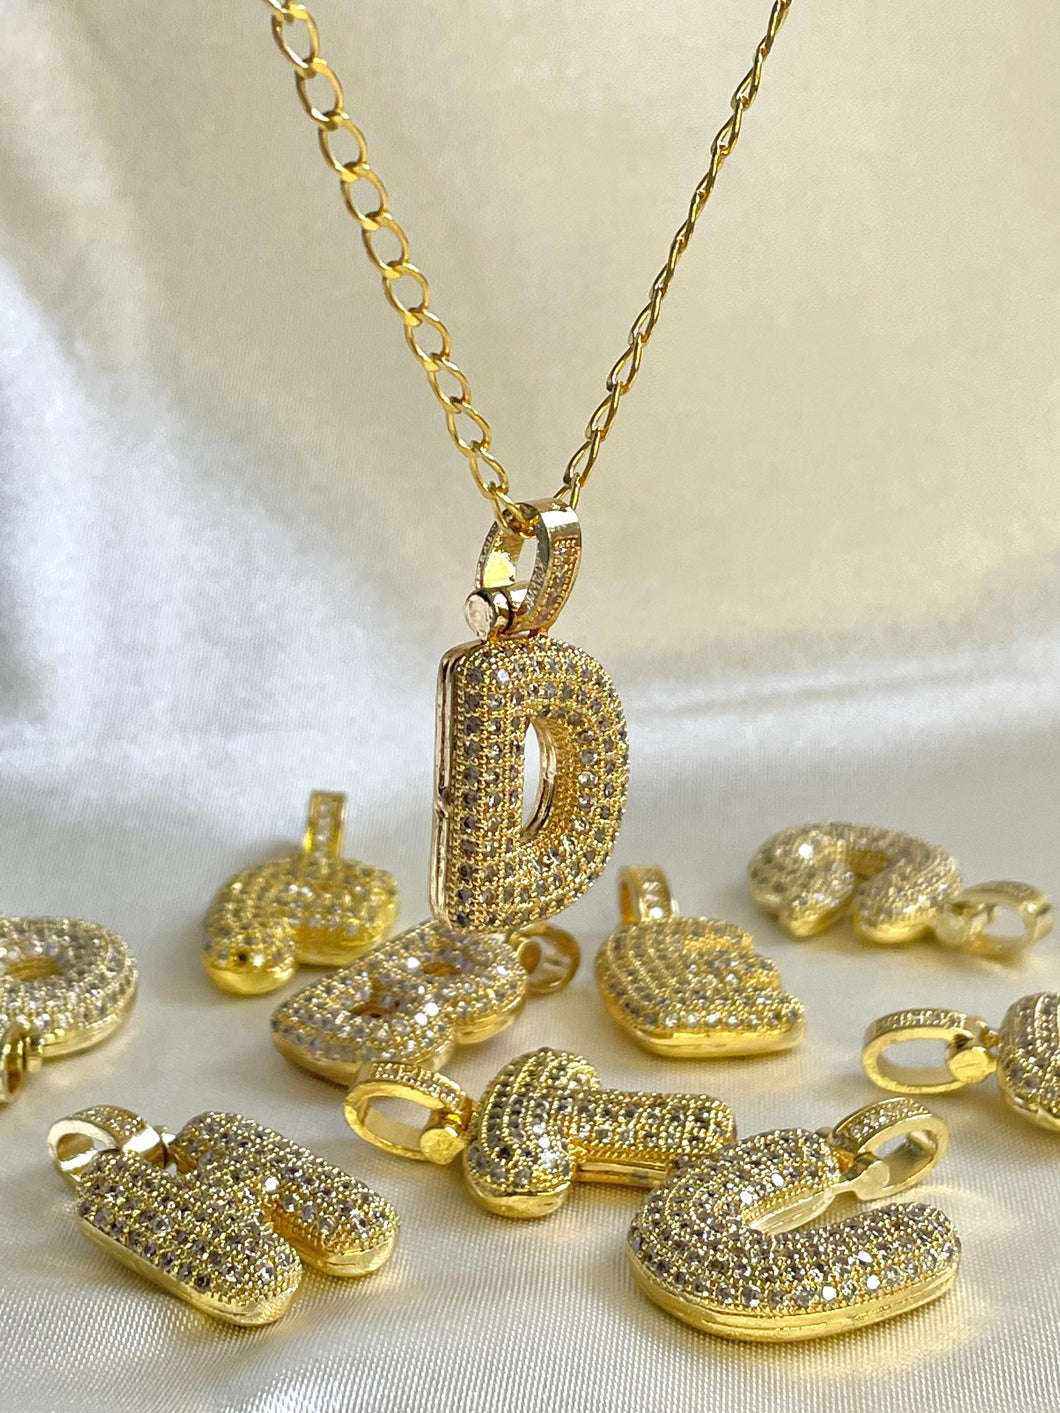 Stunning gold plated bubble letter pendants, SKU# M343